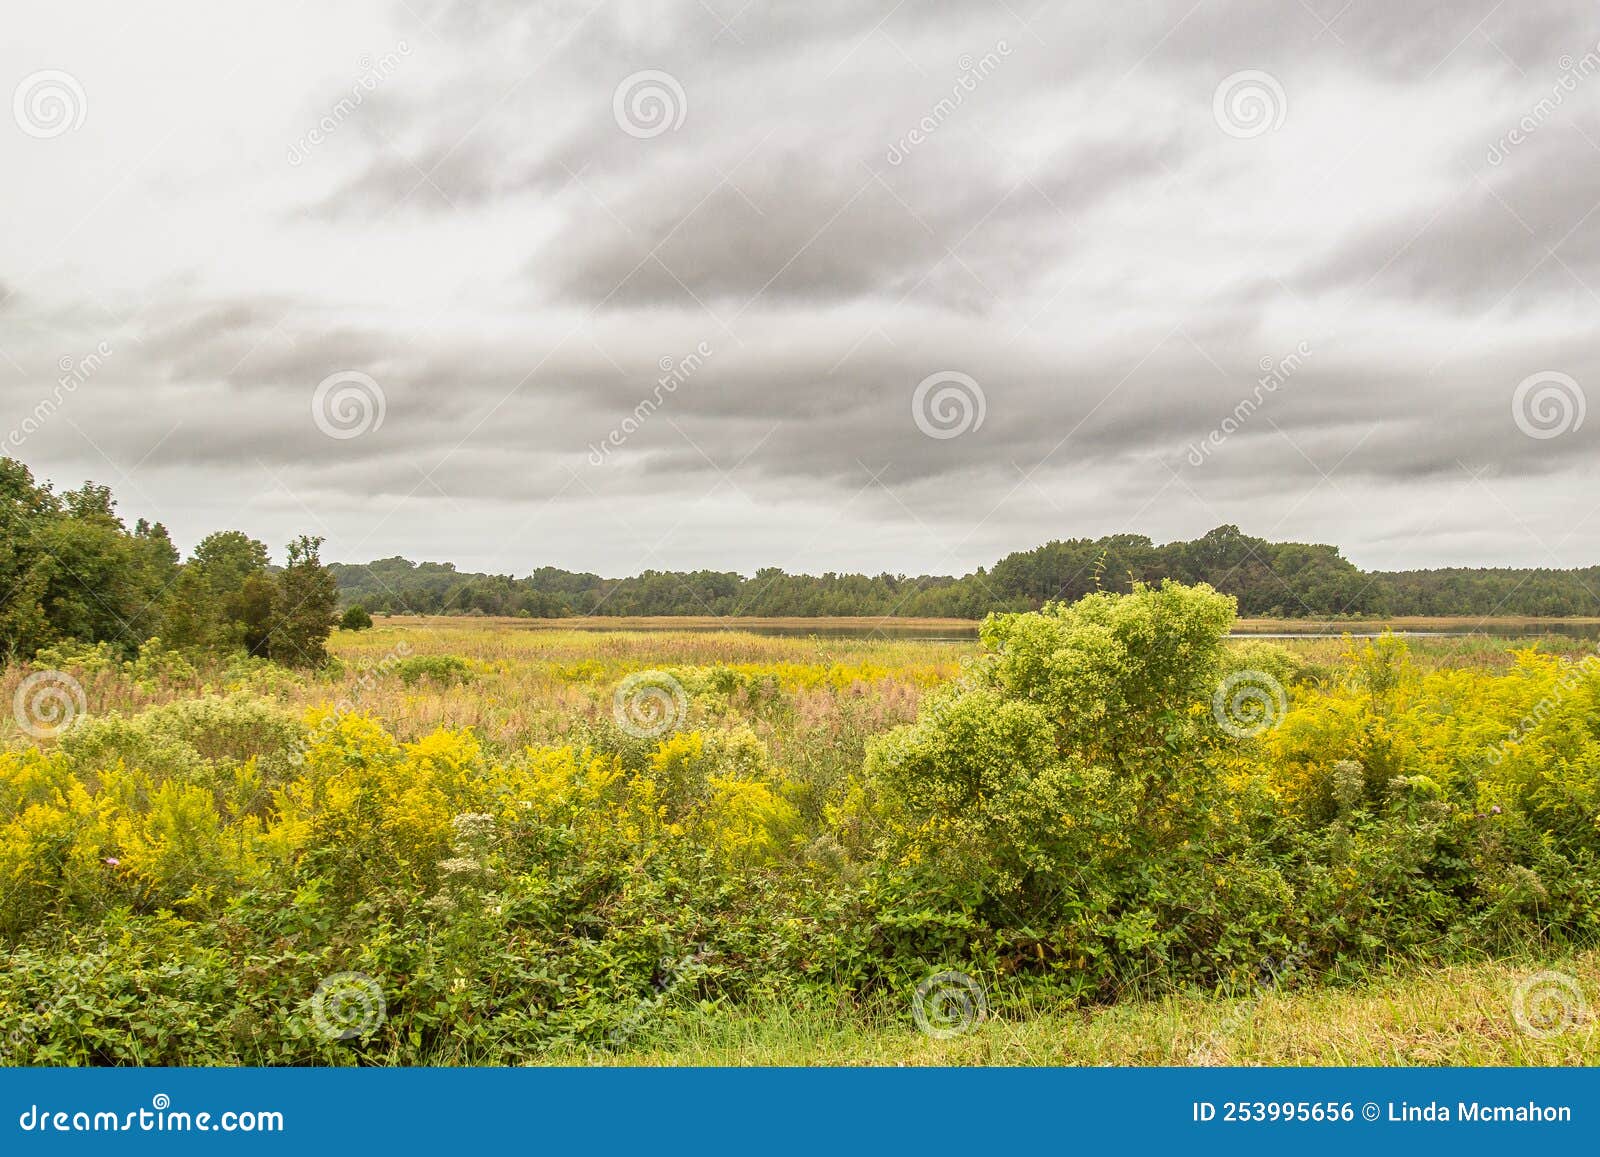 landscape image at bombay hook nwr in delaware with a field of goldenrod and a stormy, cloudy sky .